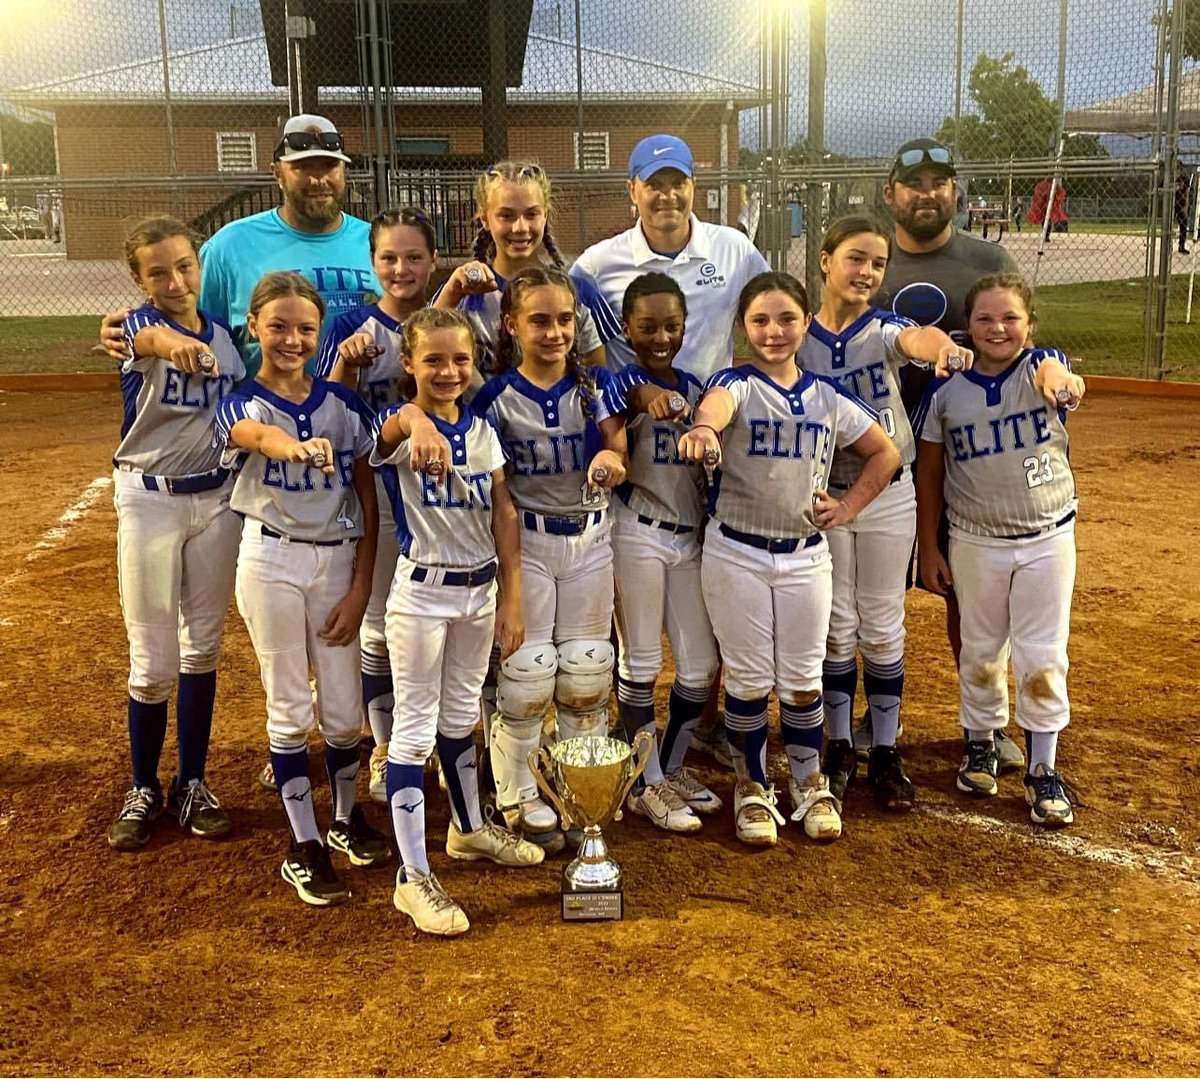 🥎Despite the long rain delay on Championship Day at the The 2022 FASA World Series in Branson MO, games successfully concluded!🏆Shout out to 10U 🥇Champions Texas Elite Rickert and 🥈Finalists Elite Softball 10U!! Well done!⭐️💫 @ExploreBranson #fastpitch #softball